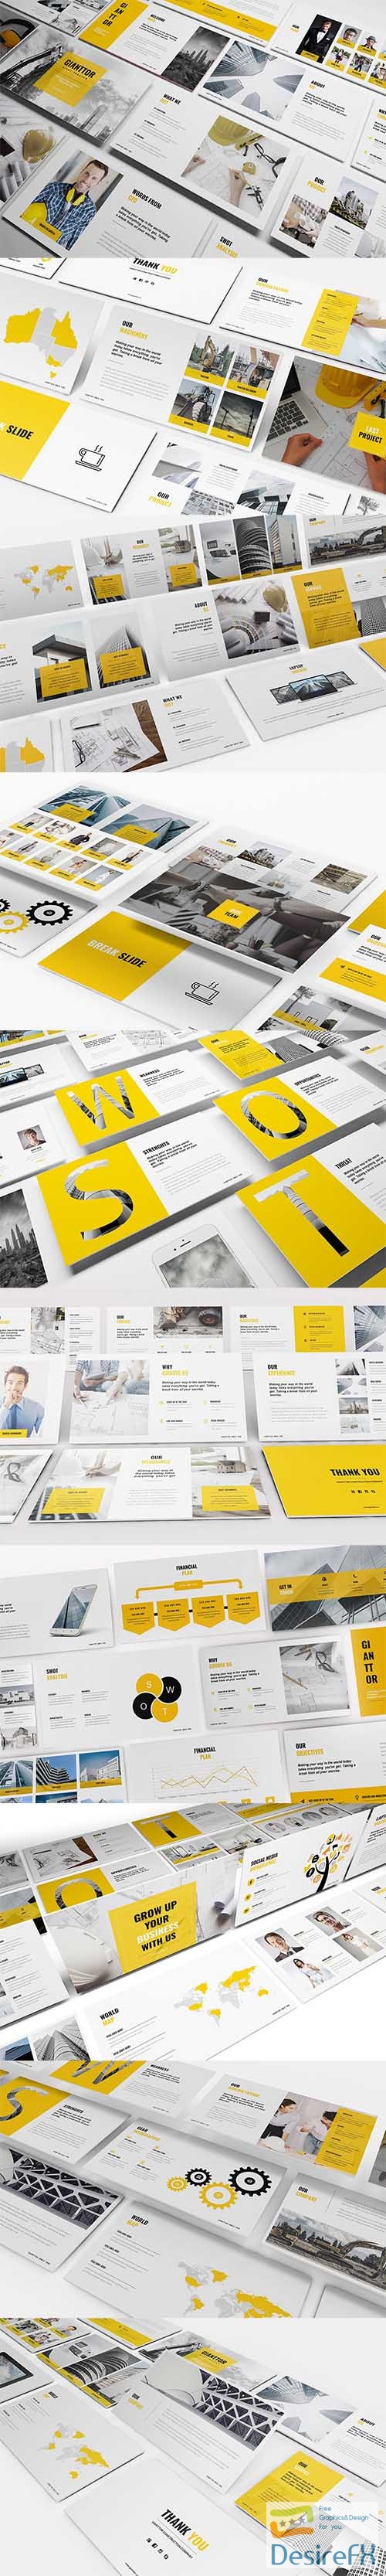 Construction Powerpoint Template